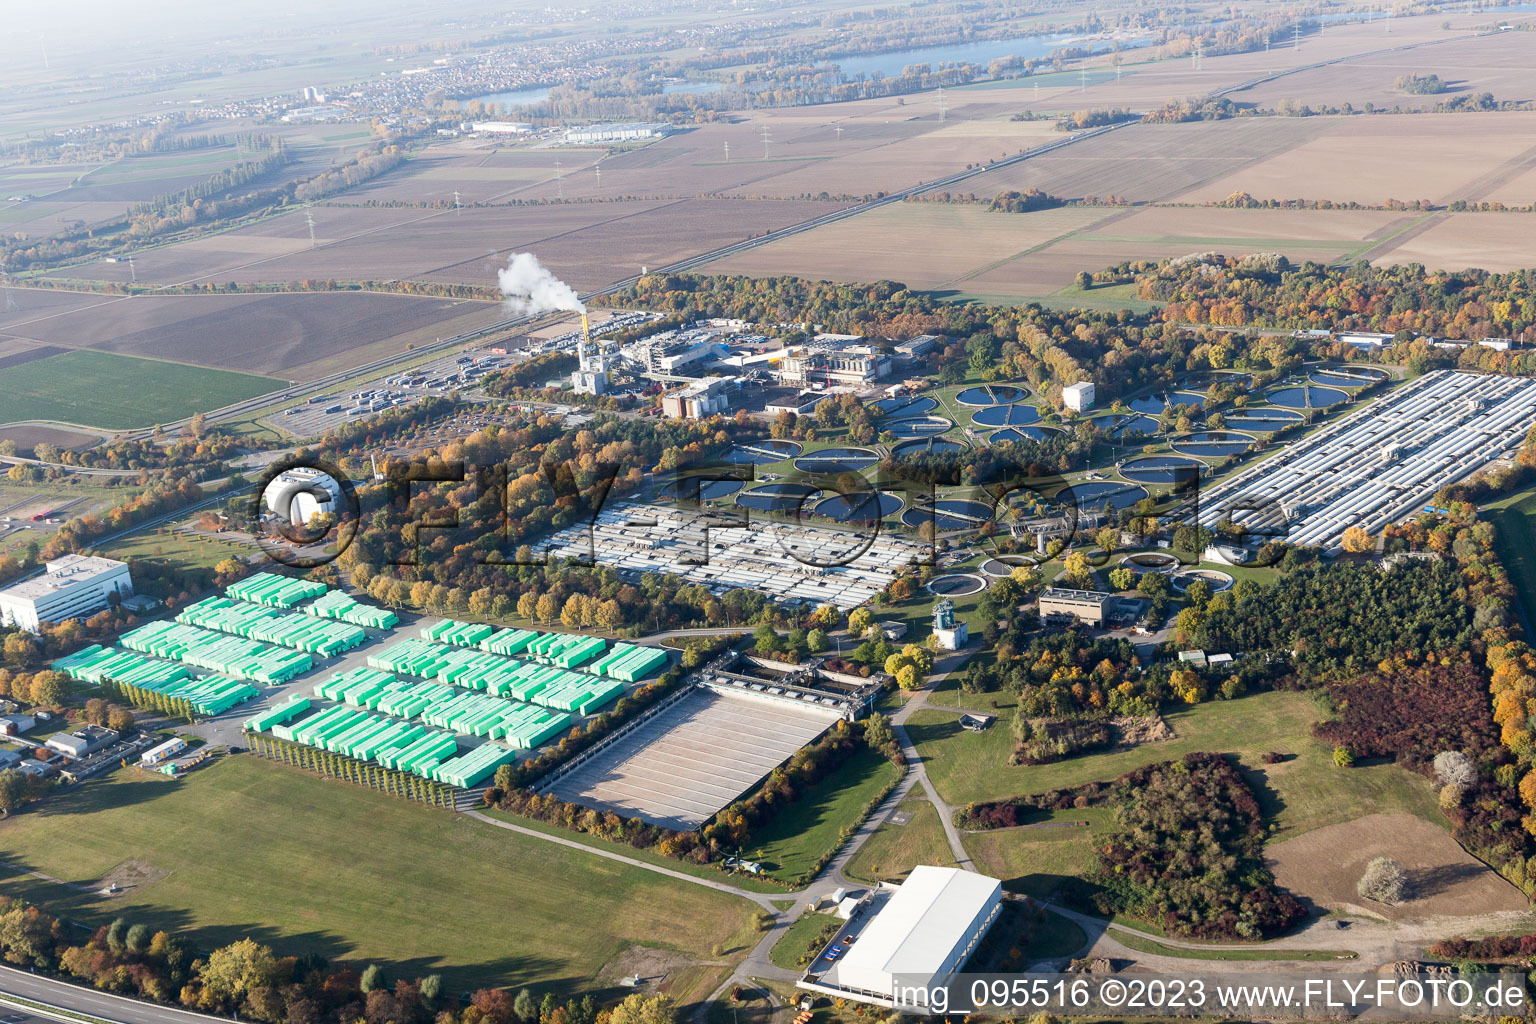 Drone image of BASF sewage treatment plant in the district Mörsch in Frankenthal in the state Rhineland-Palatinate, Germany